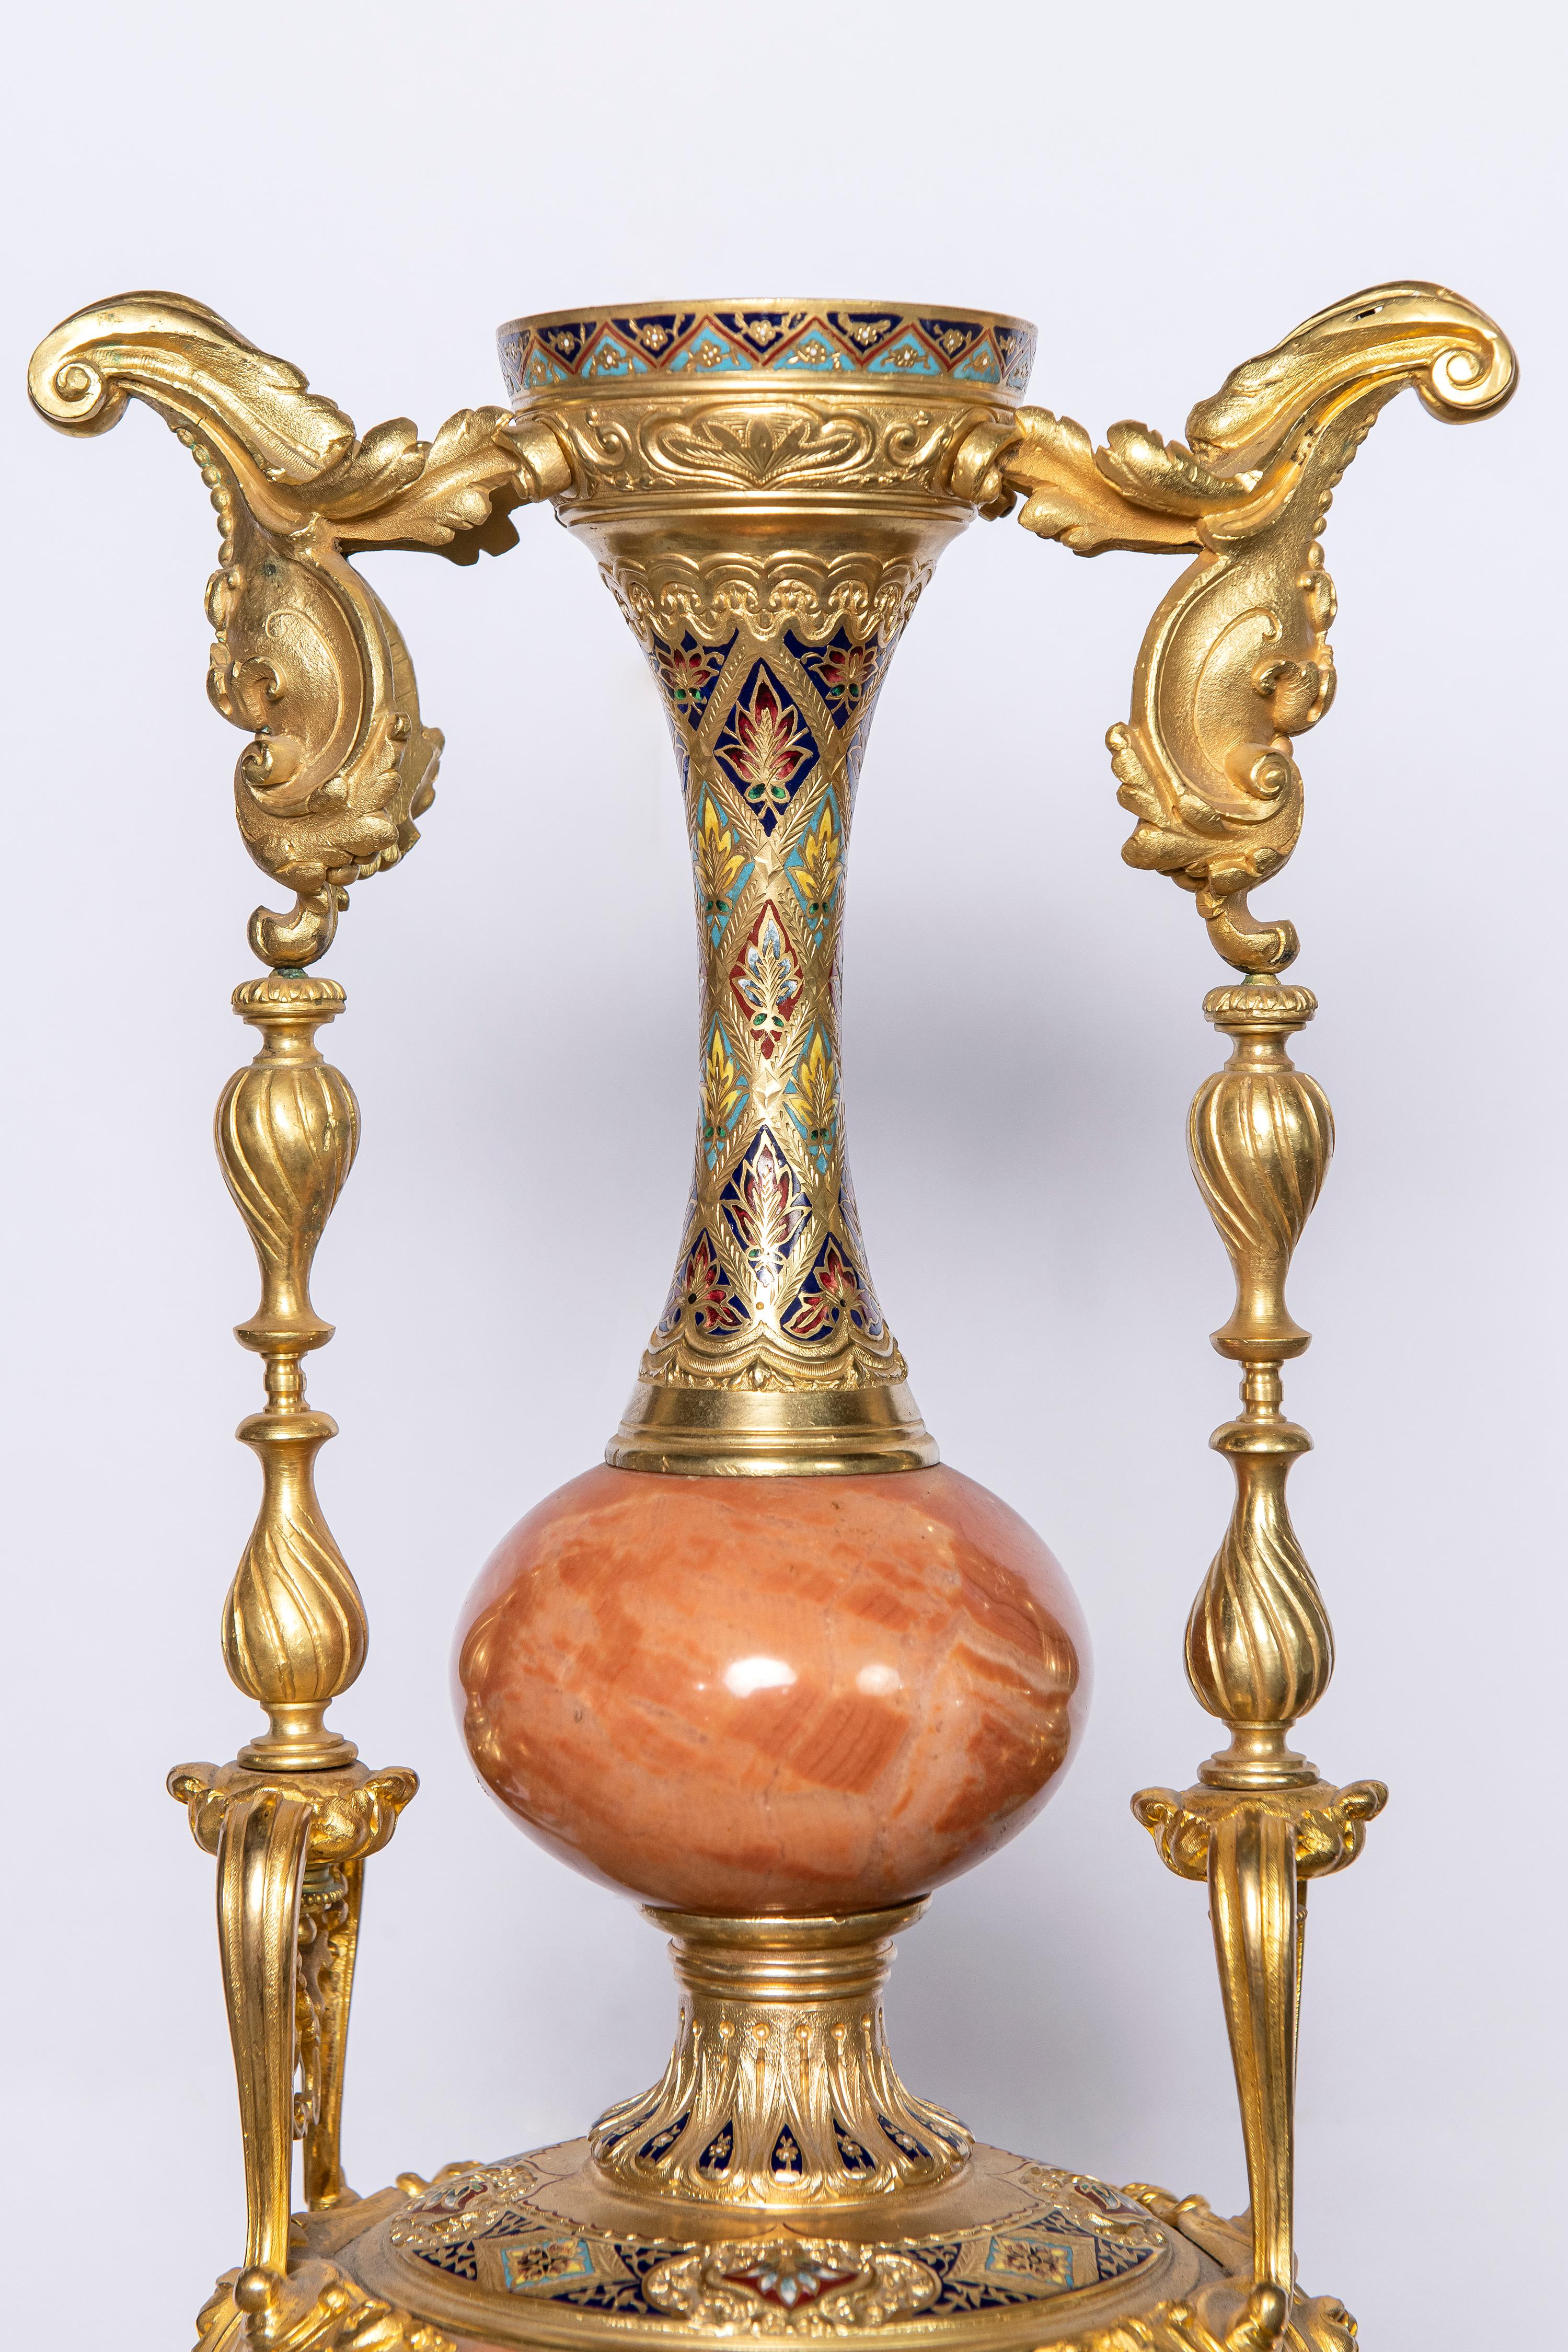 Marble, gilt bronze and cloisonné center, neoclassical style.